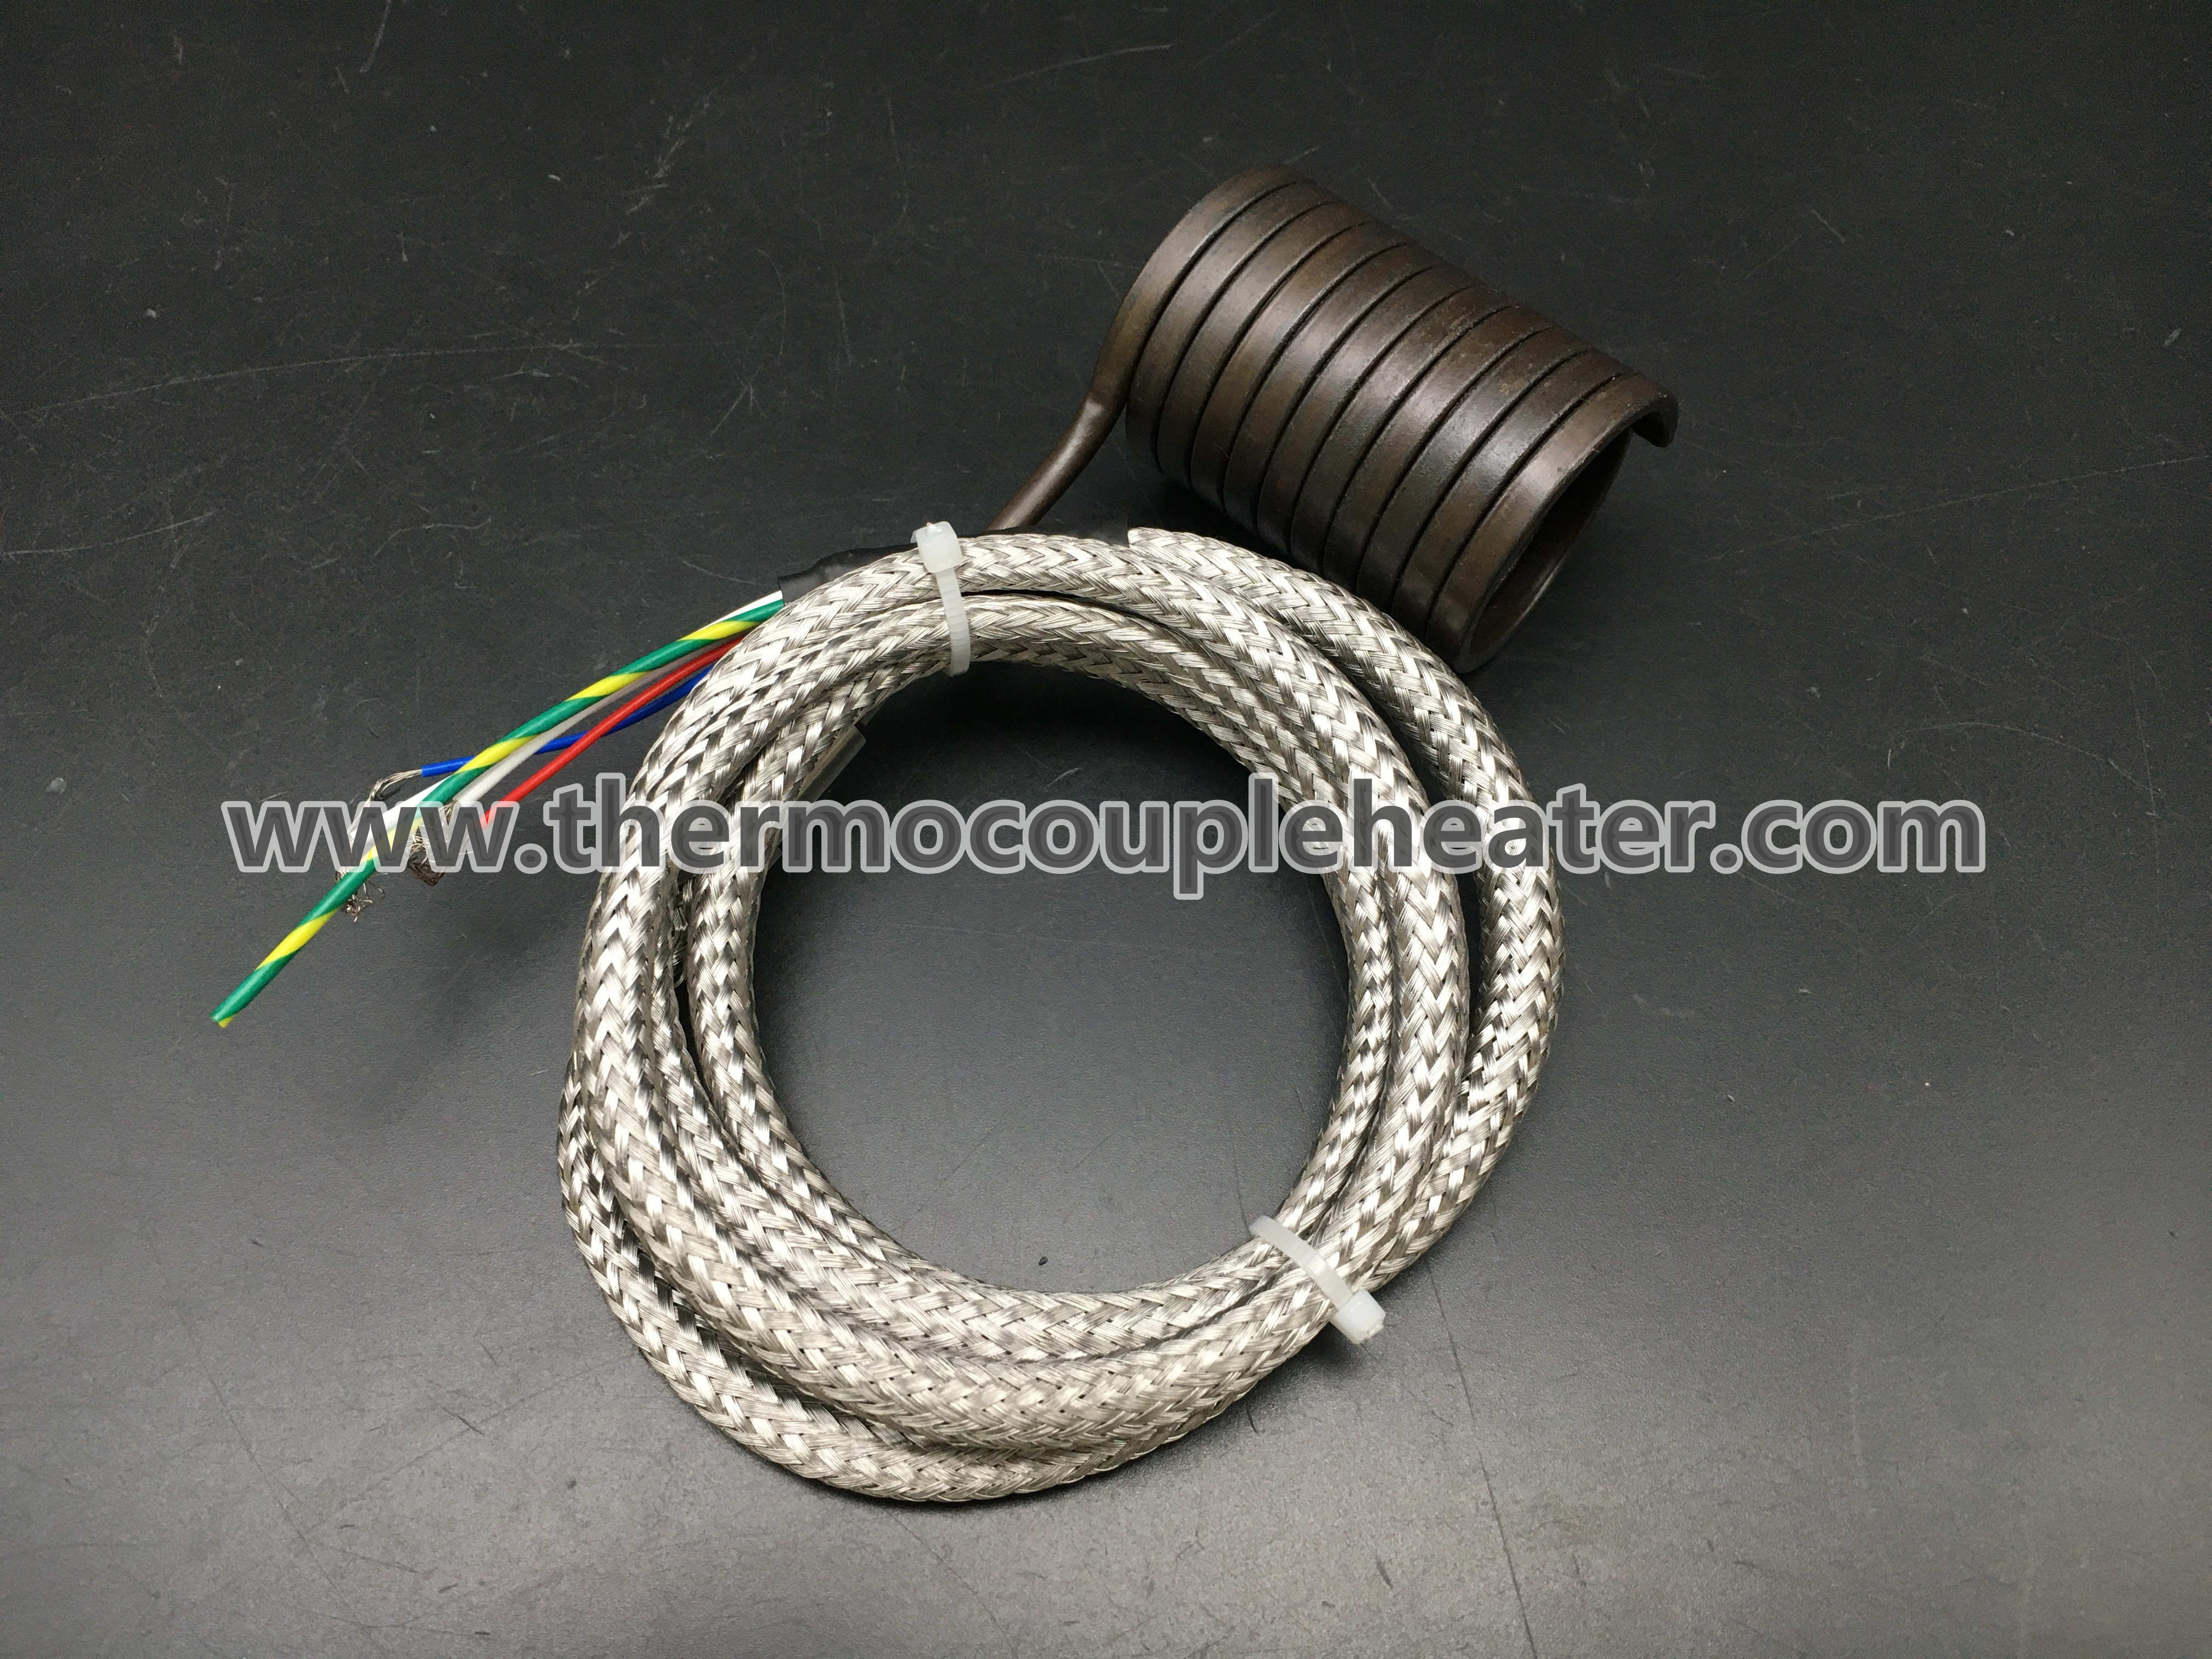 Spiral Heater Mini Tubular Resistor Forming According To Customer Requirements